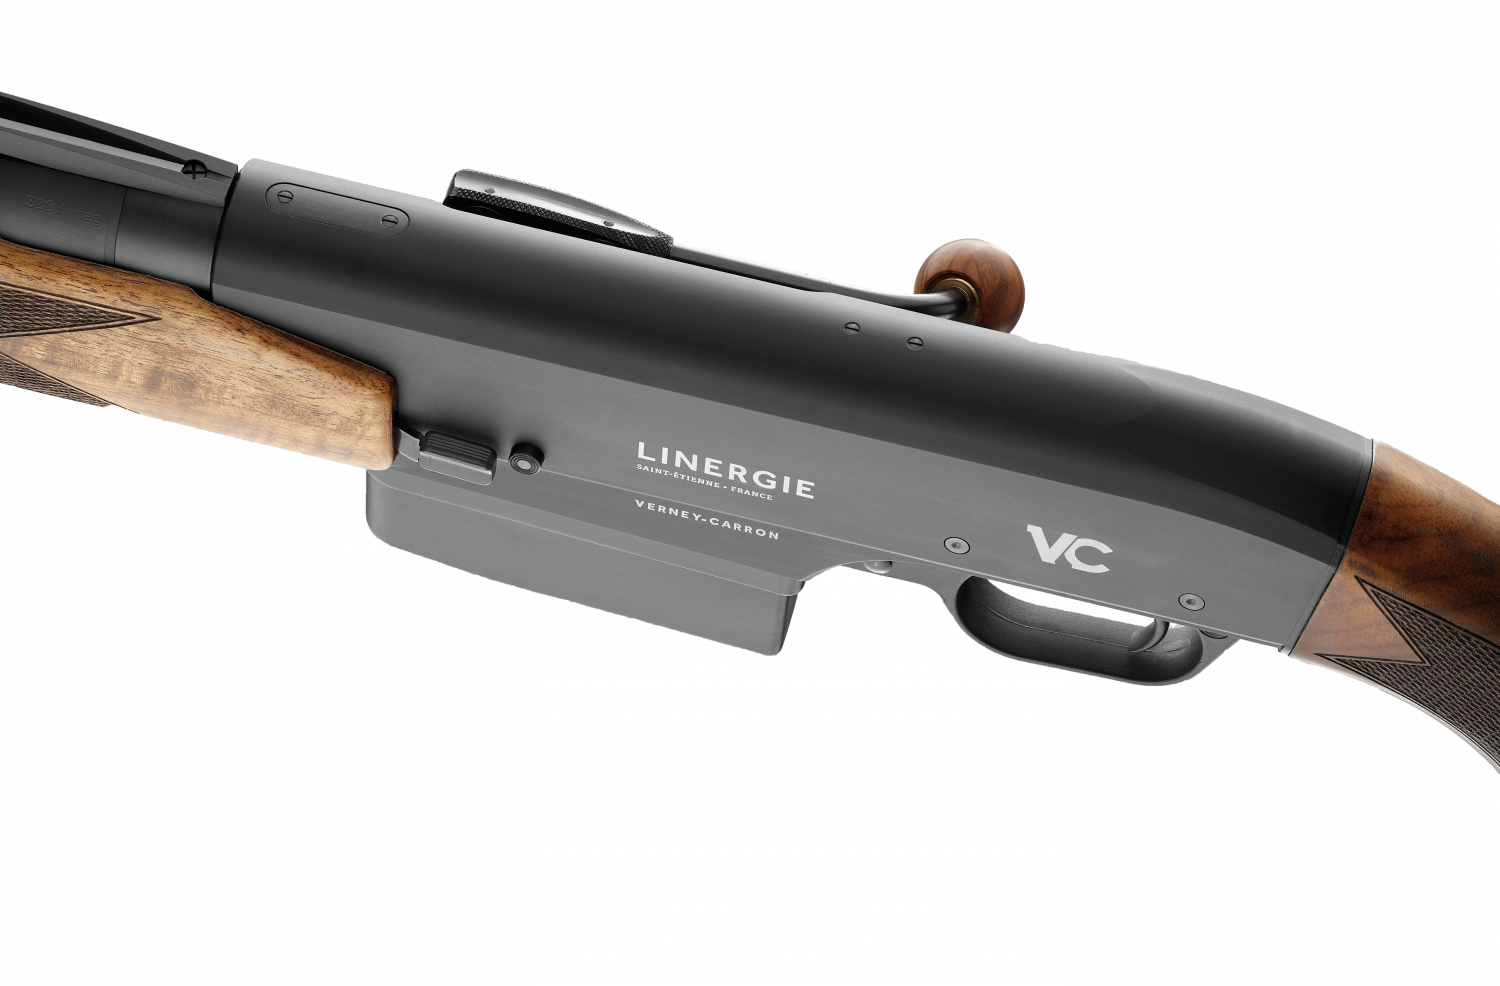 Verney-Carron LINERGIE Straight-Pull Rifle (3)